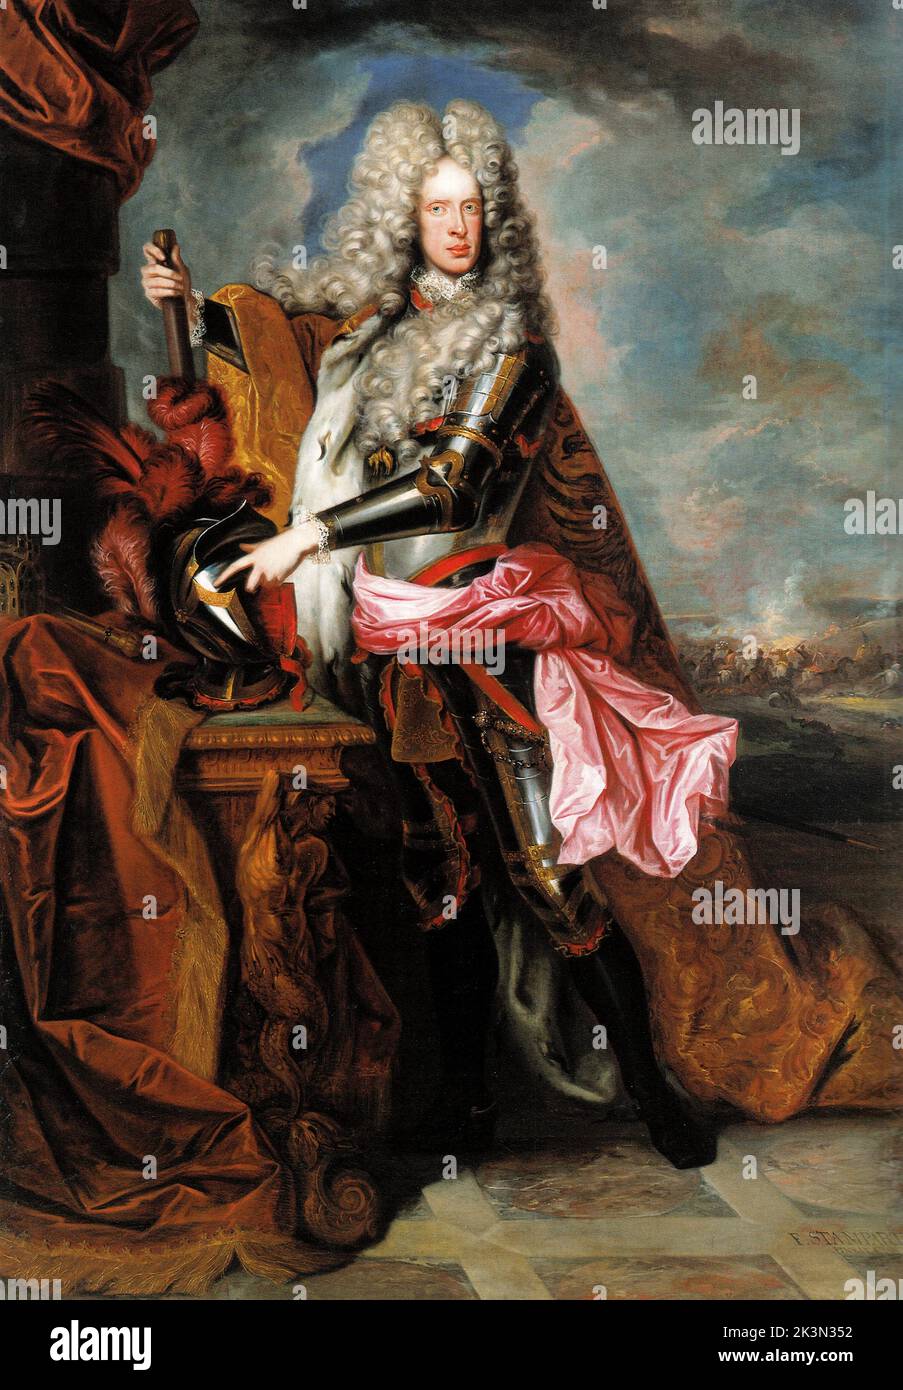 Joseph I (Joseph Jacob Ignaz Johann Anton Eustachius; 26 July 1678 – 17 April 1711) was Holy Roman Emperor and ruler of the Austrian Habsburg monarchy from 1705 until his death in 1711. He was the eldest son of Emperor Leopold I from his third wife, Eleonor Magdalene of Neuburg. Joseph was crowned King of Hungary at the age of nine in 1687 and was elected King of the Romans at the age of eleven in 1690. He succeeded to the thrones of Bohemia and the Holy Roman Empire when his father died. Stock Photo